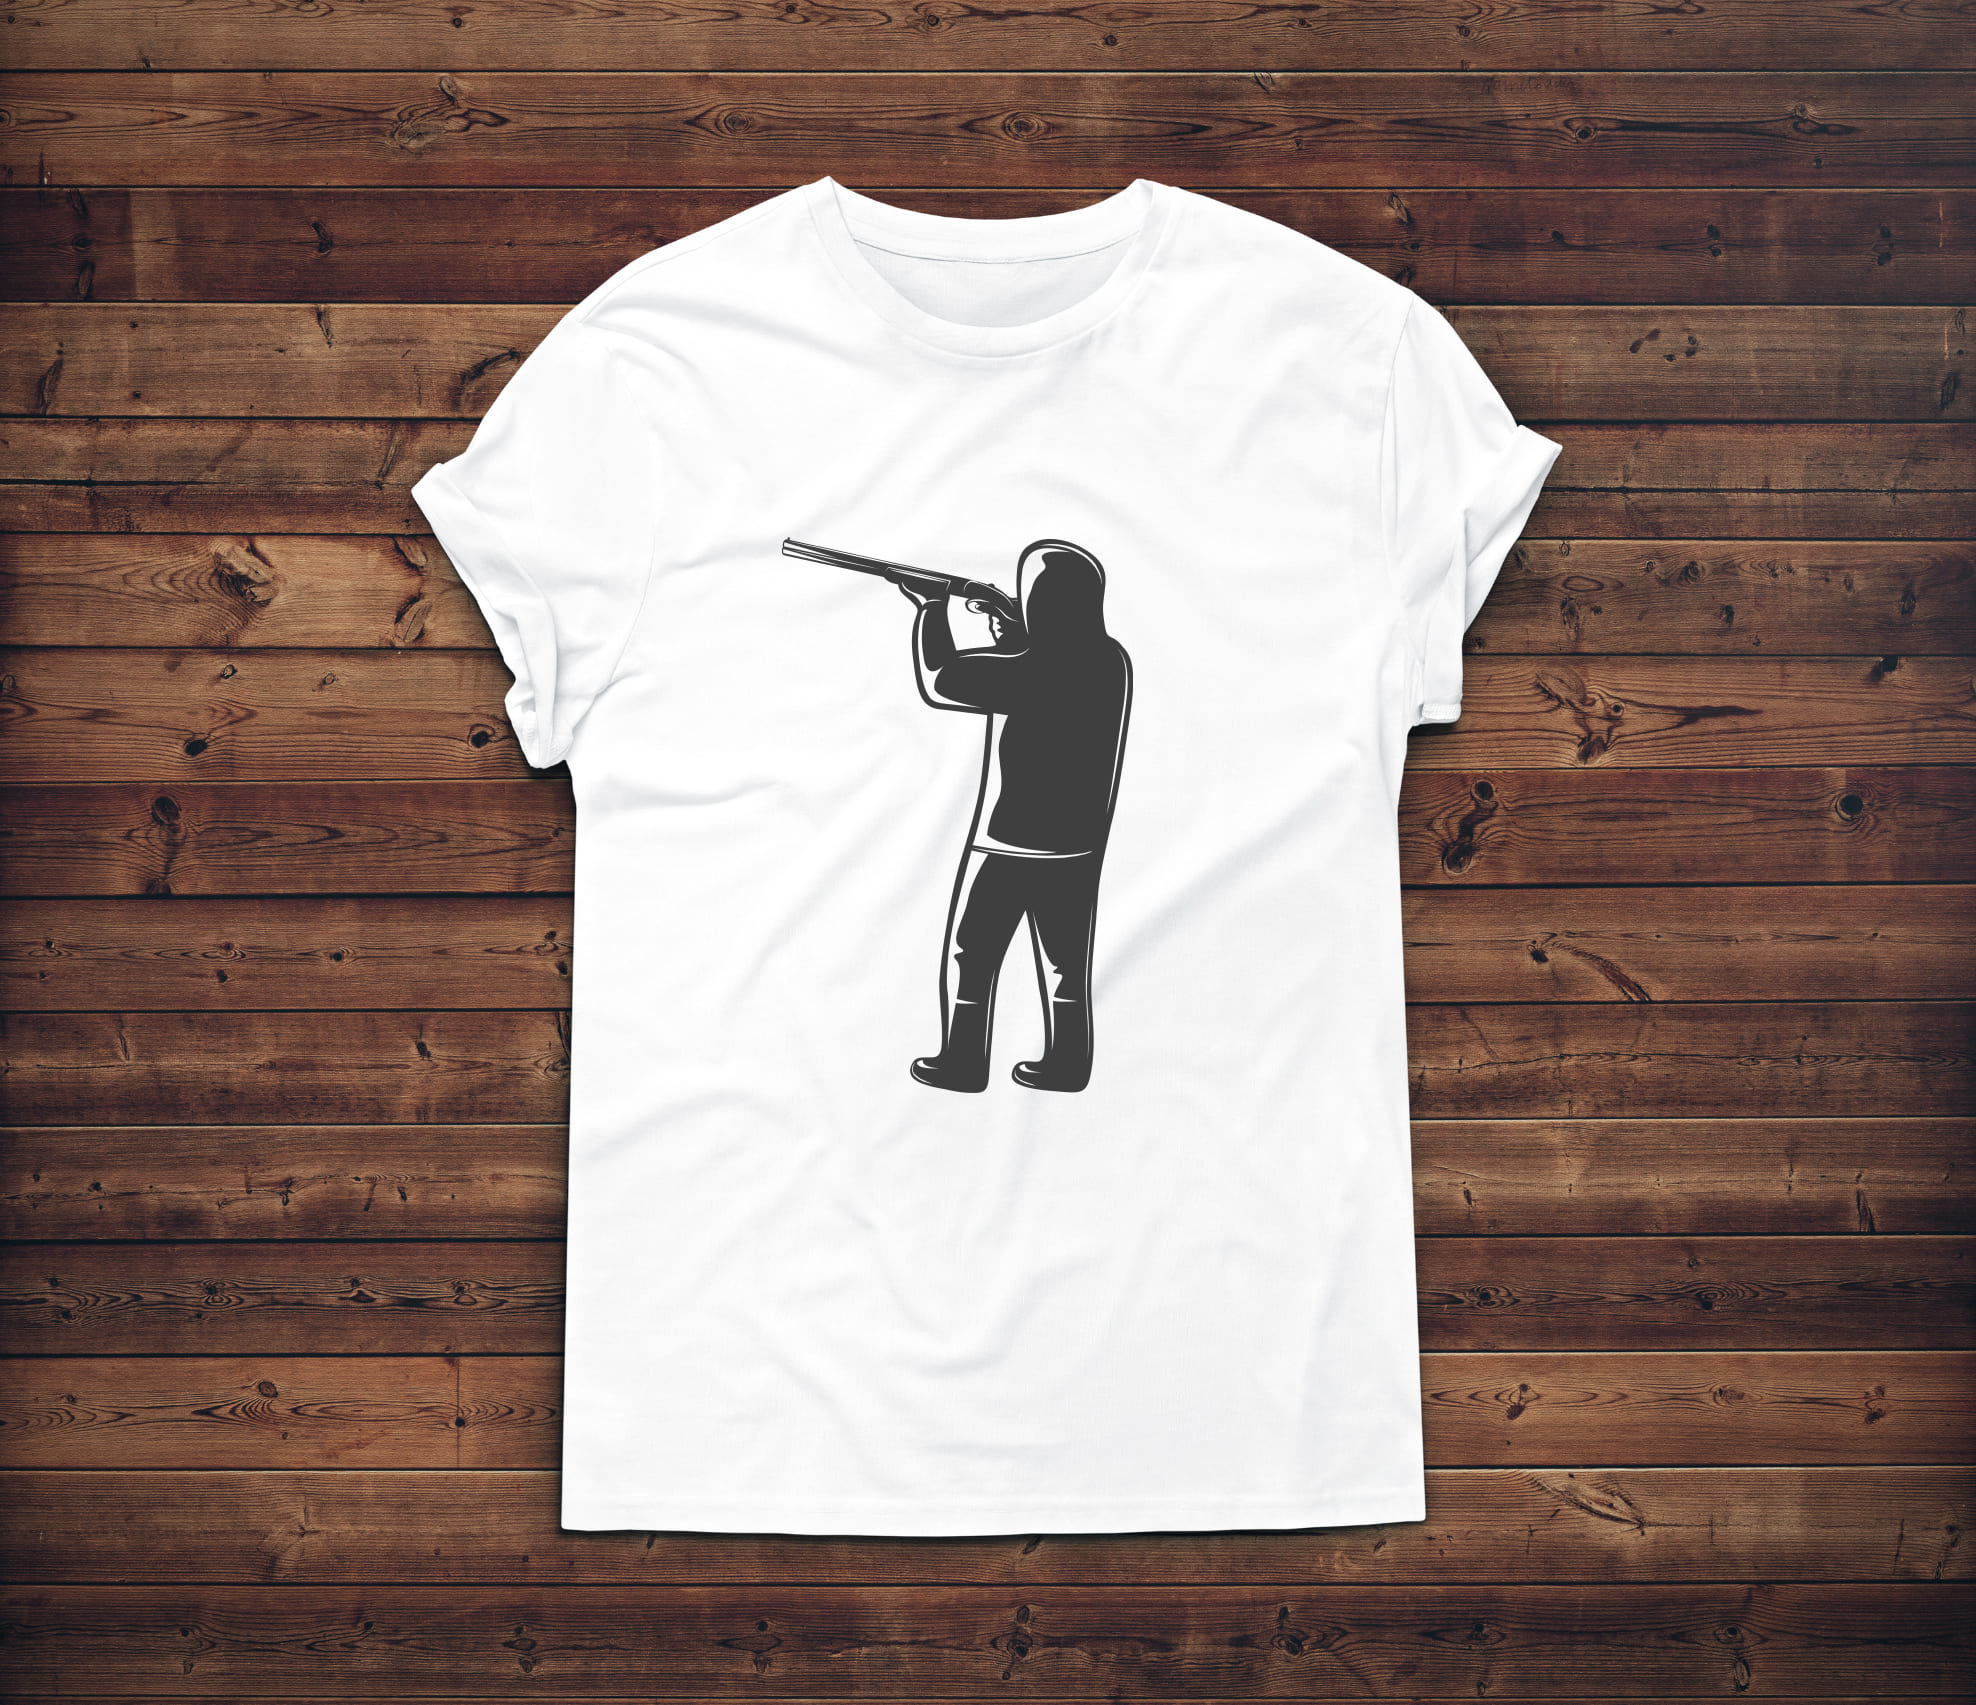 Image of white t-shirt with exquisite duck hunter silhouette print.